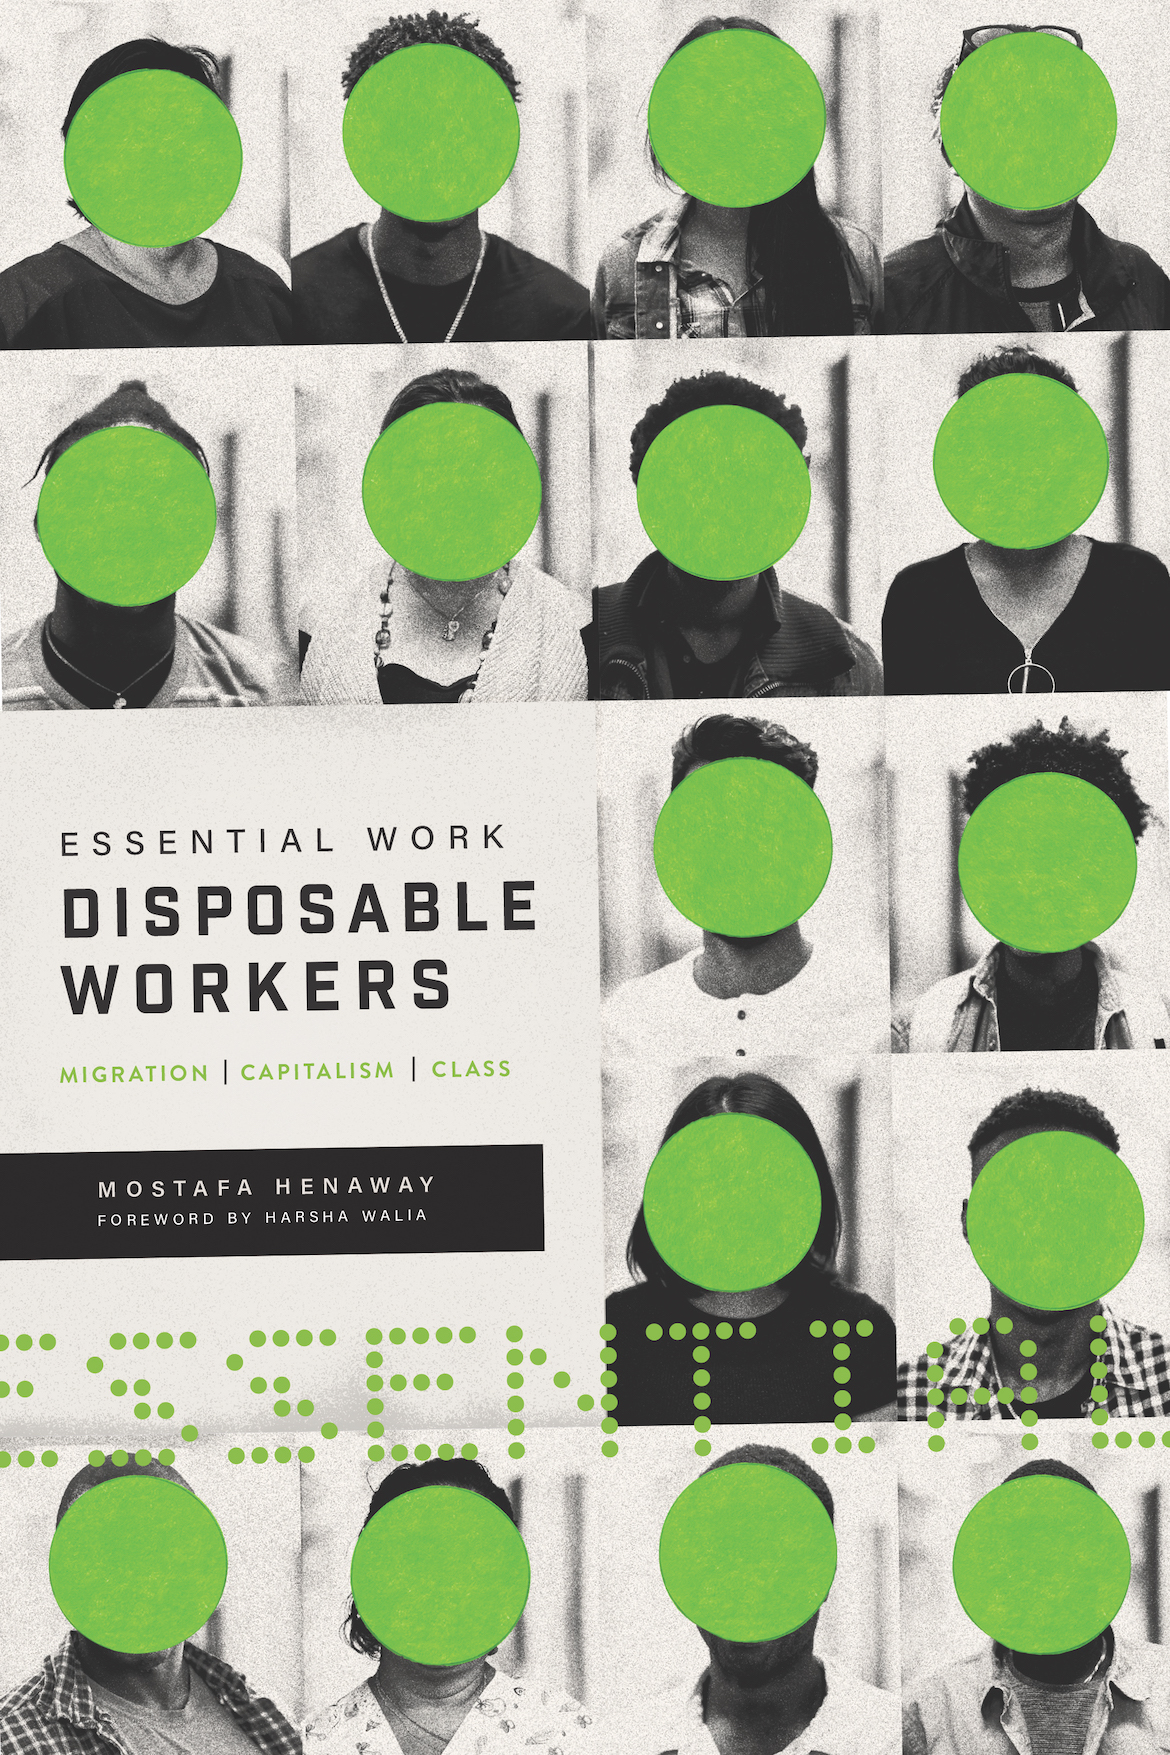 Essential Work, Disposable Workers